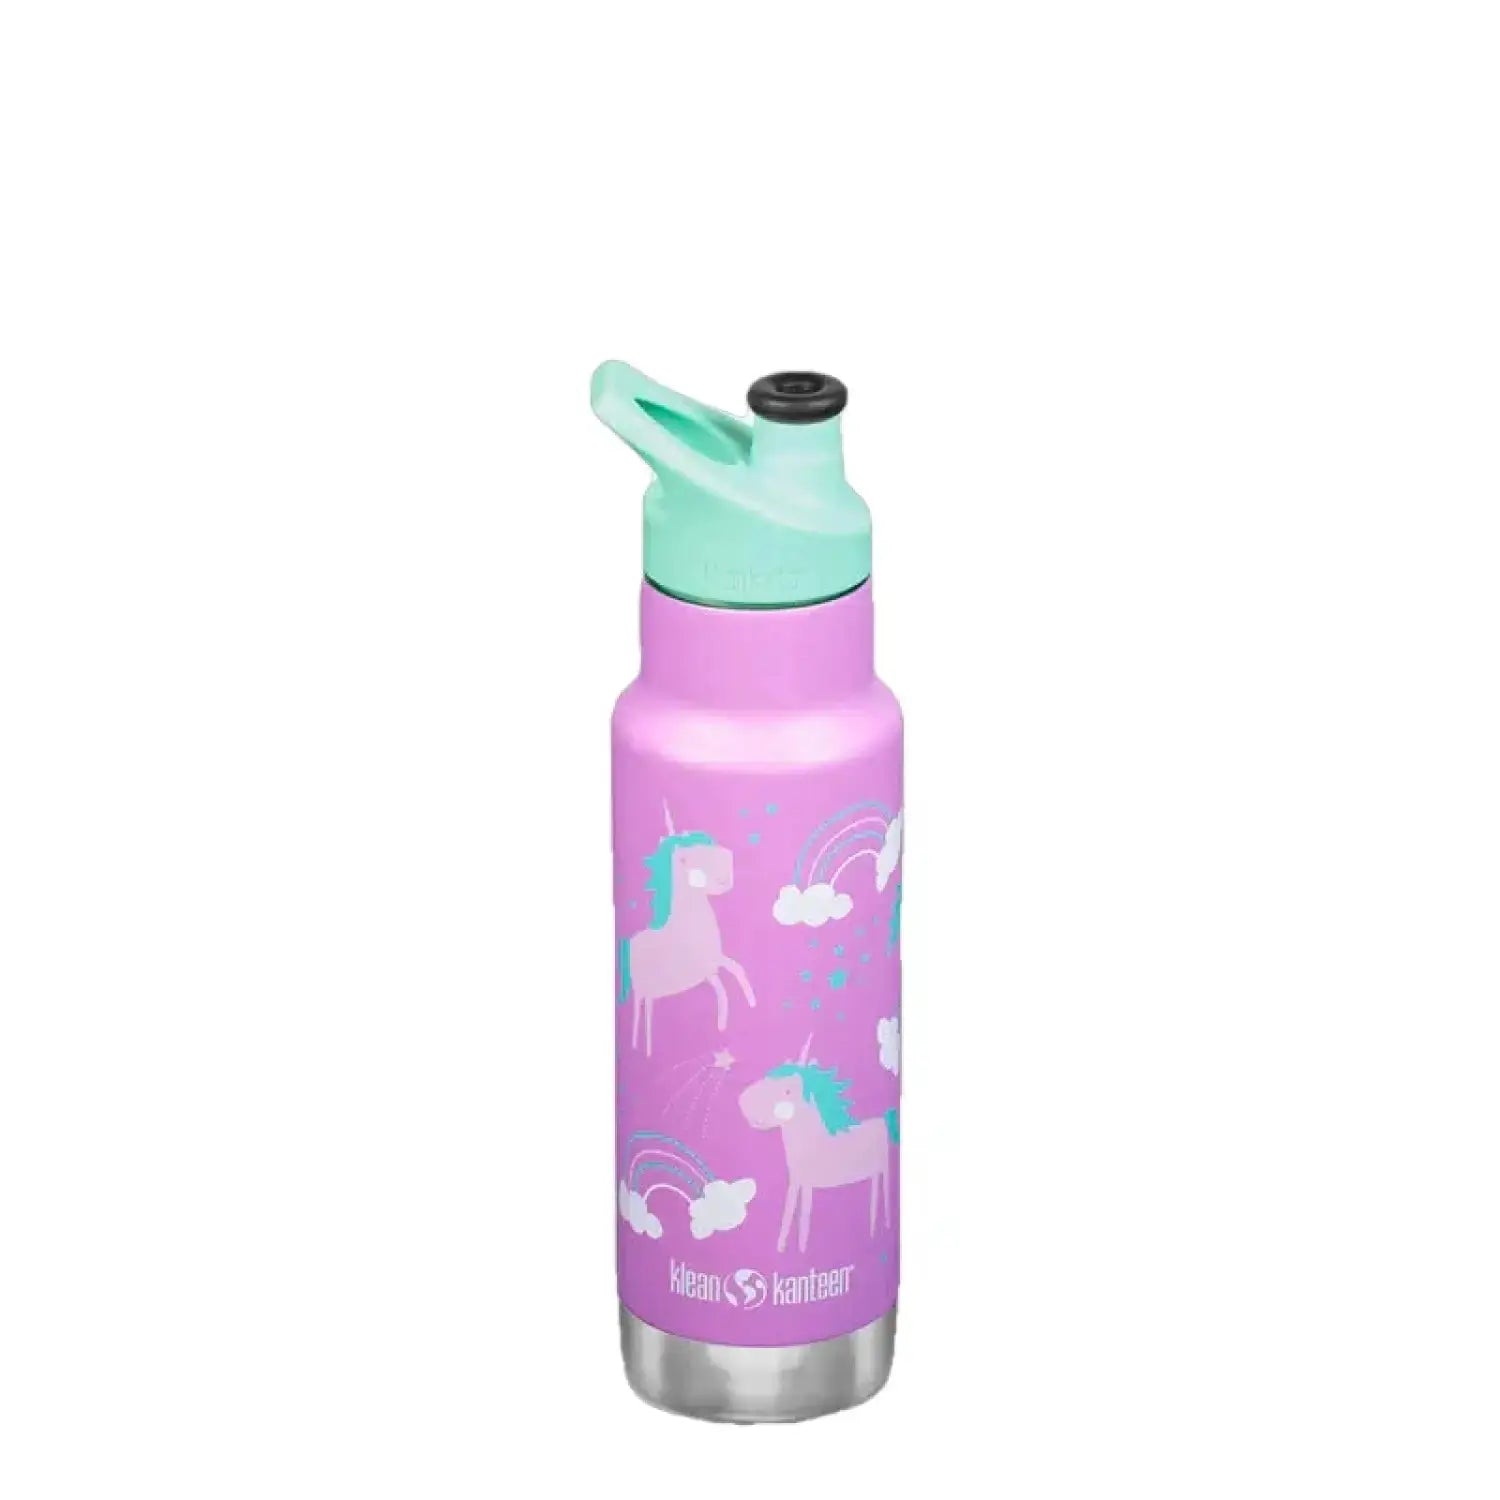 Klean Kanteen Classic's Insulated Kids Water Bottle with Sport Cap 12 oz. Purple with aqua cap. Unicorns and rainbow print in pastel colors.